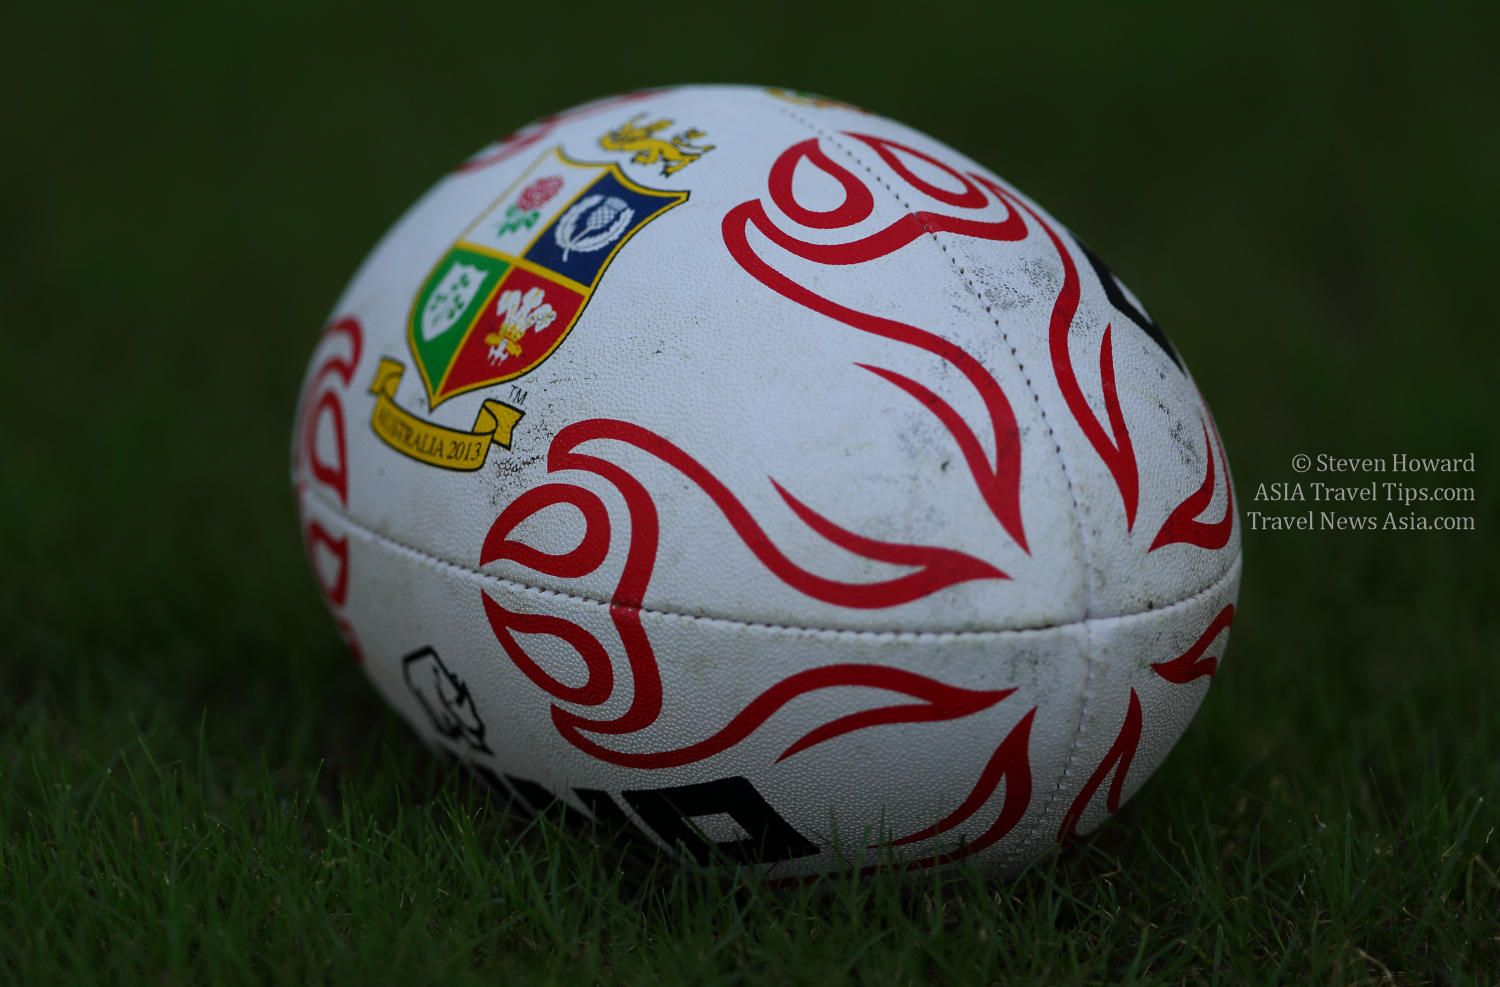 The rugby ball used when the British & Irish Lions played the Barbarians in Hong Kong in 2013. Picture by Steven Howard of TravelNewsAsia.com Click to enlarge.